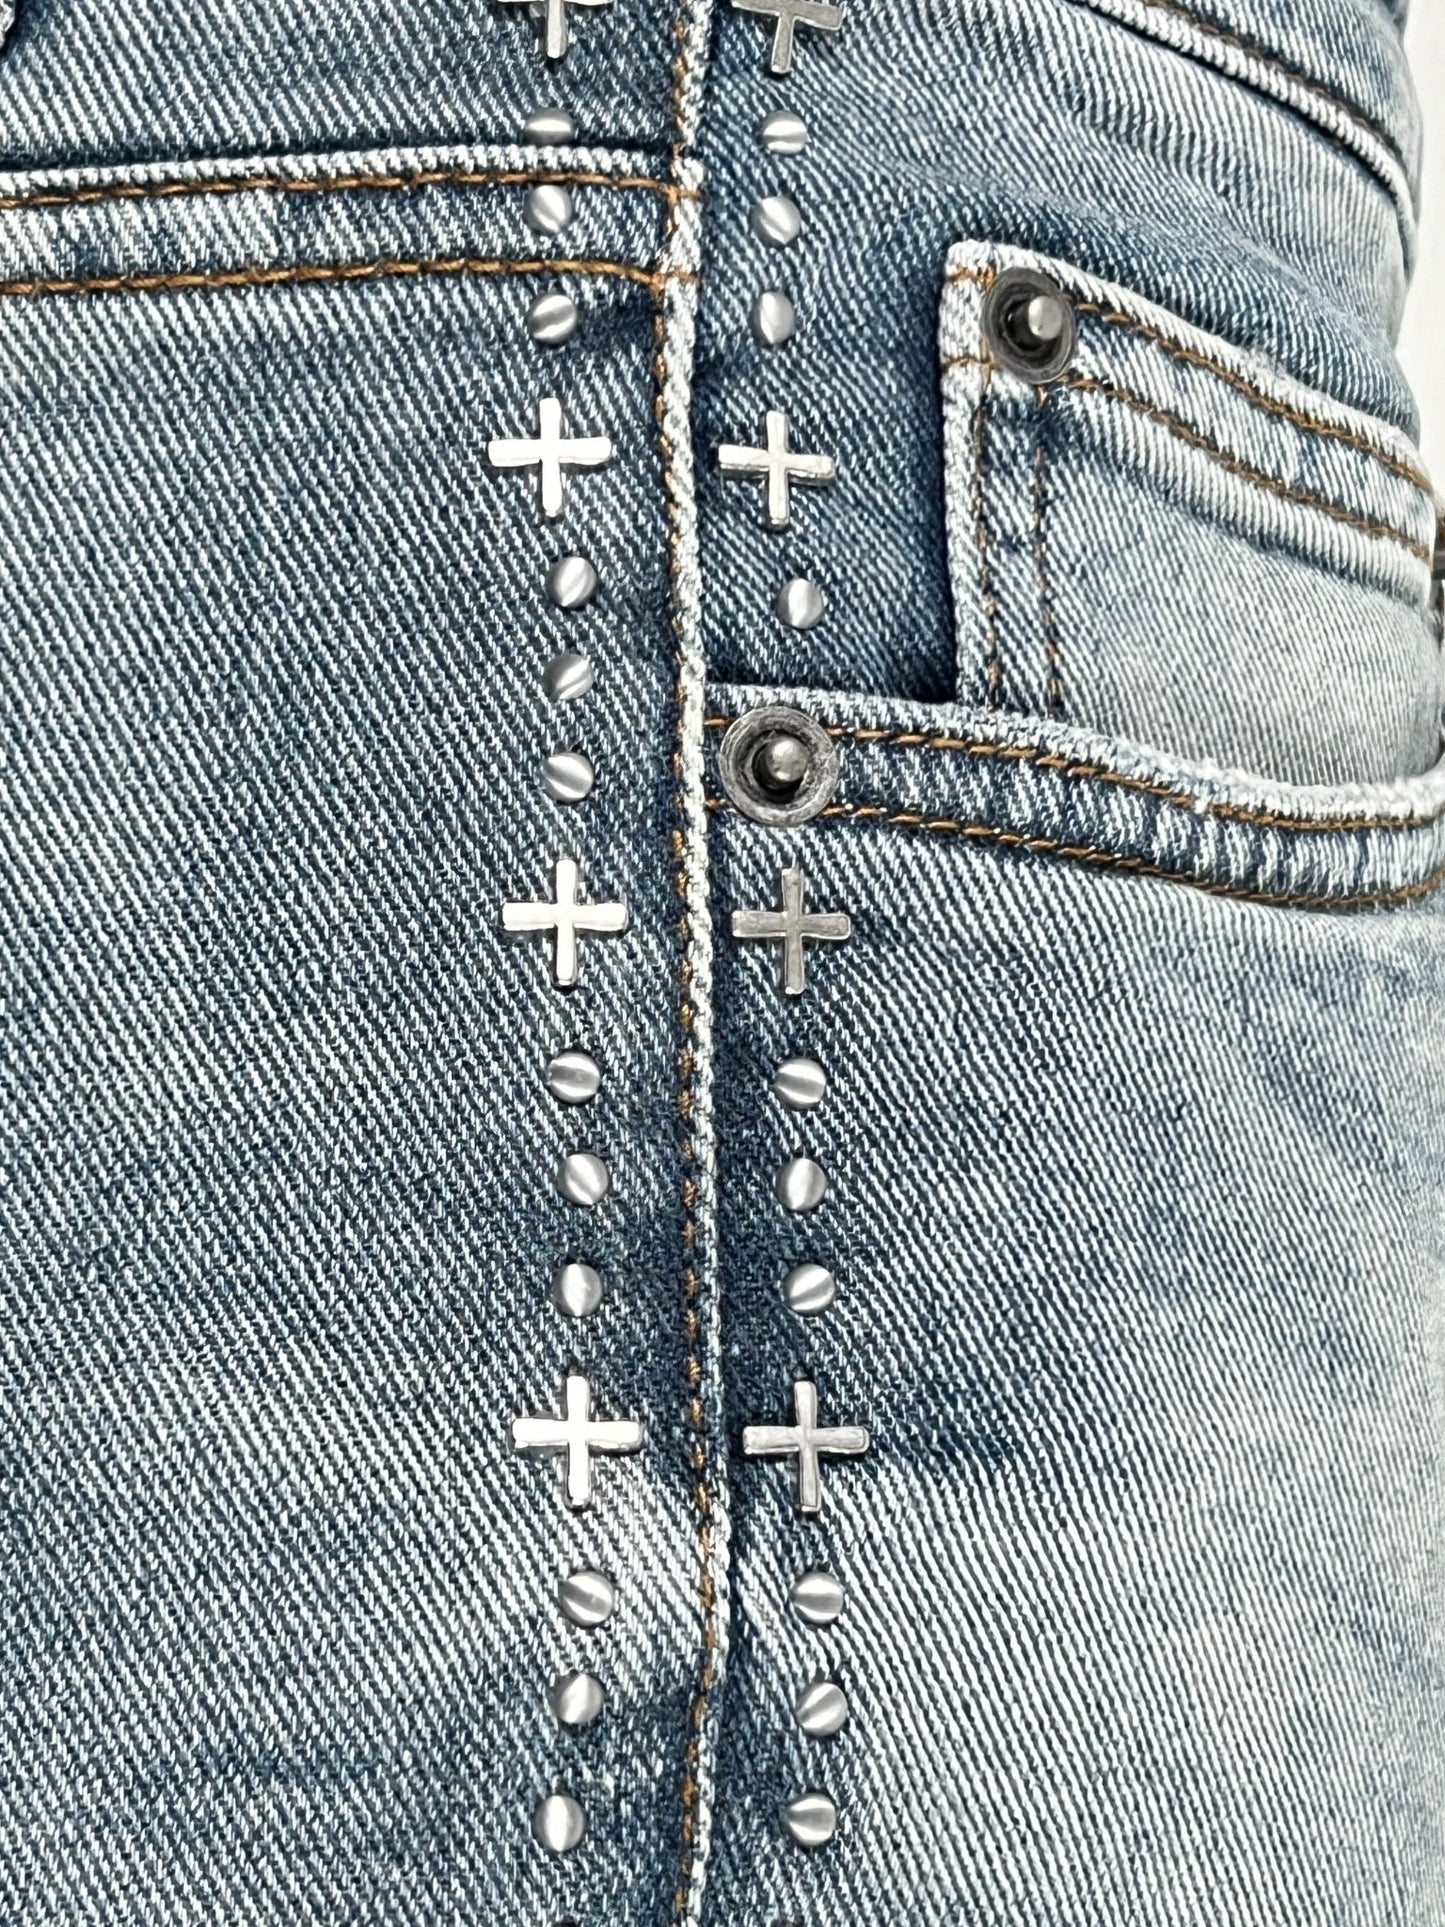 Close-up of a Ksubi BRONKO denim jeans seam with metal rivets and contrast stitching.